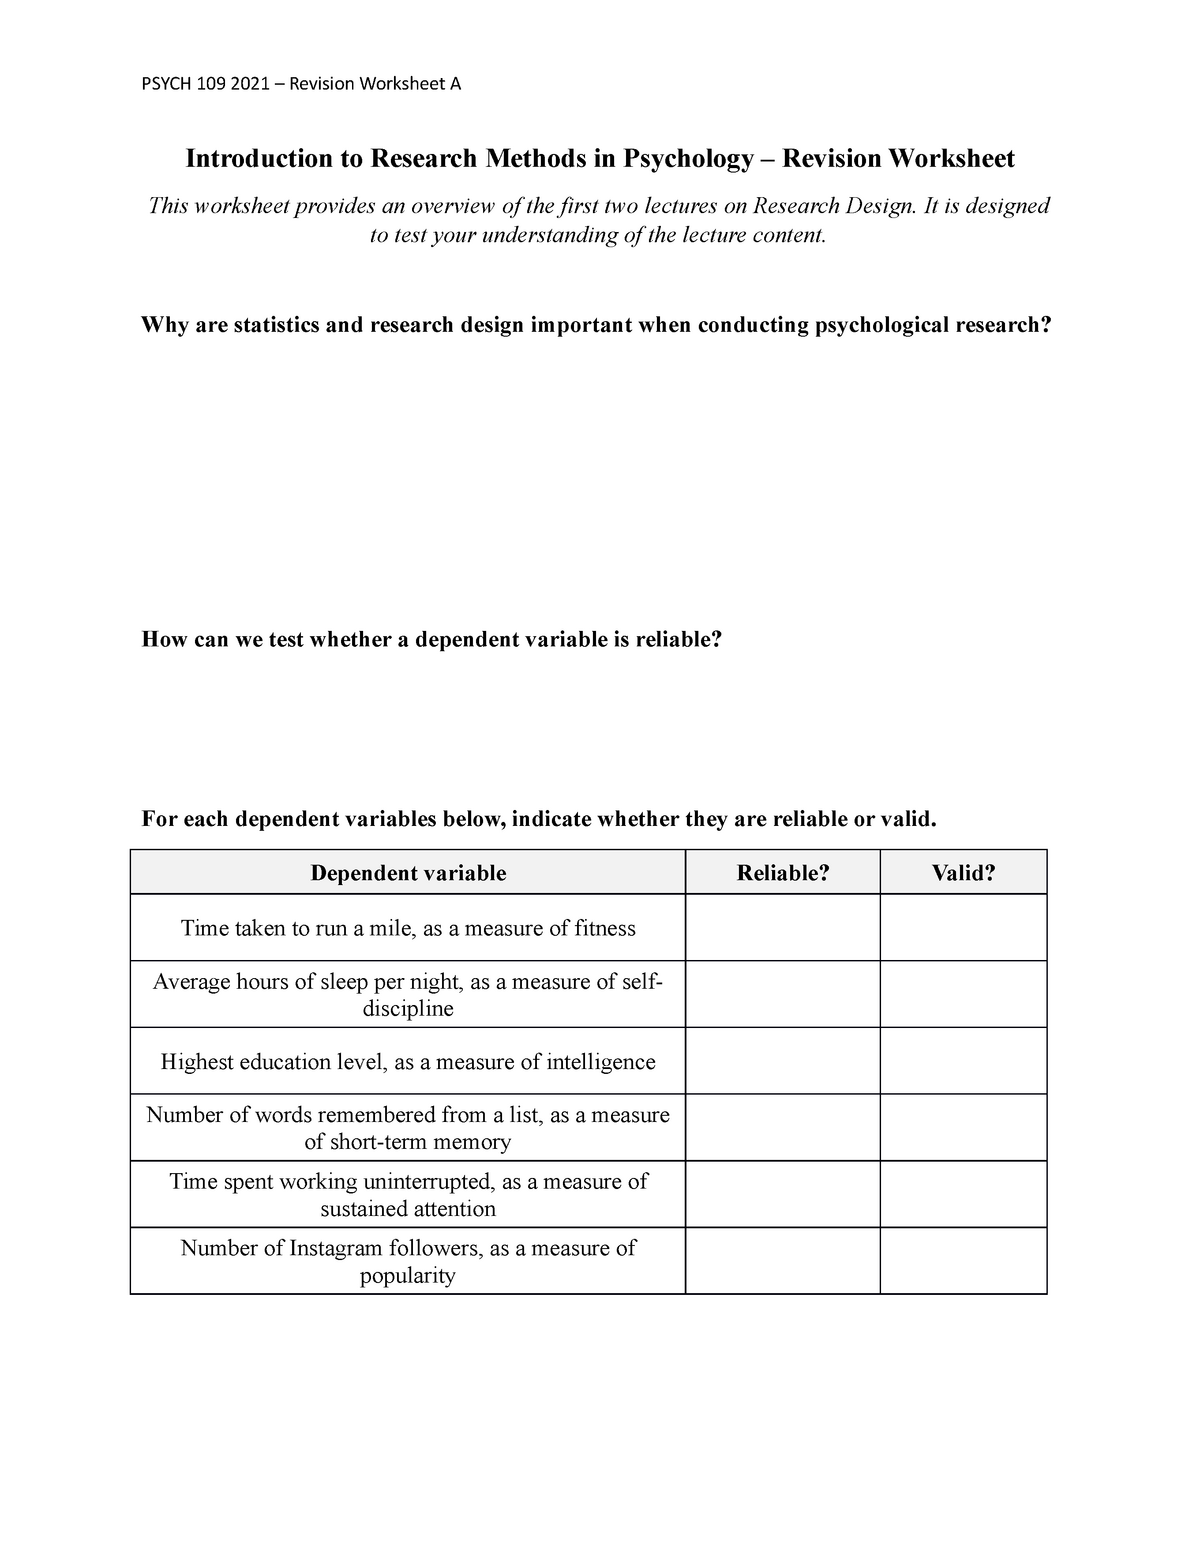 research methods in psychology worksheet answers